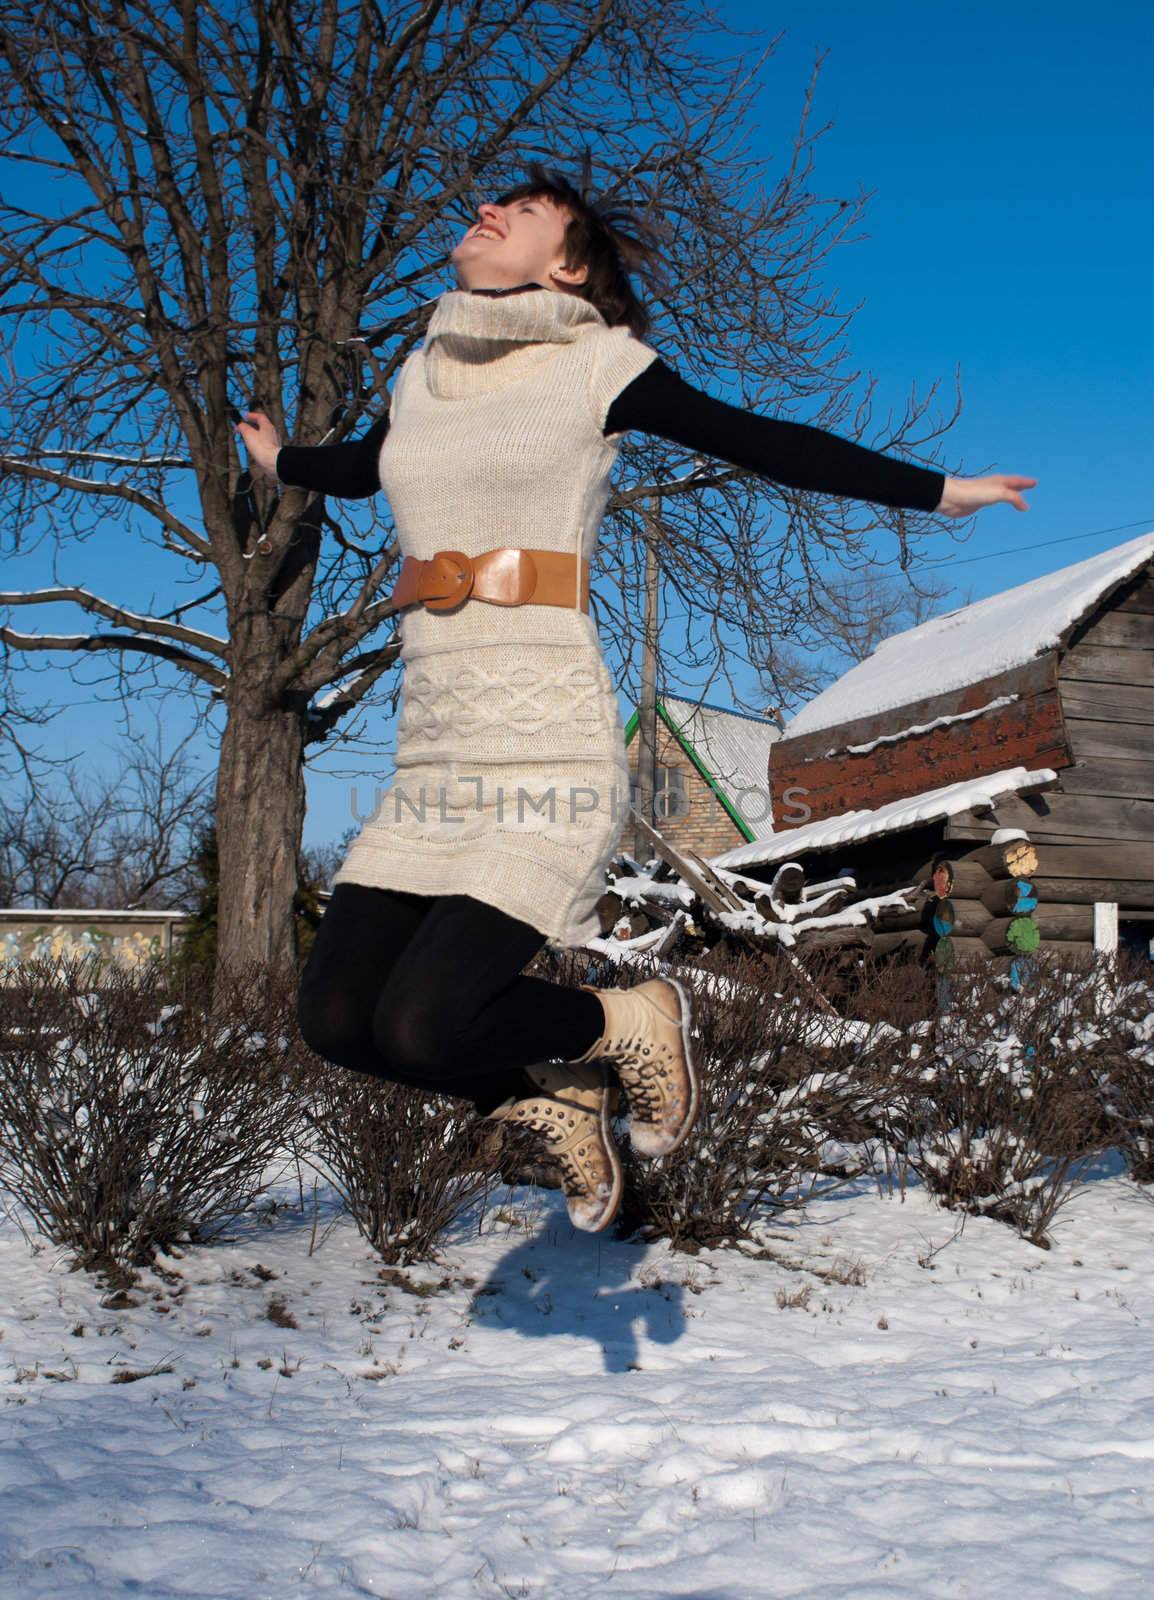 Young lady jumping at winter time by AndreyKr